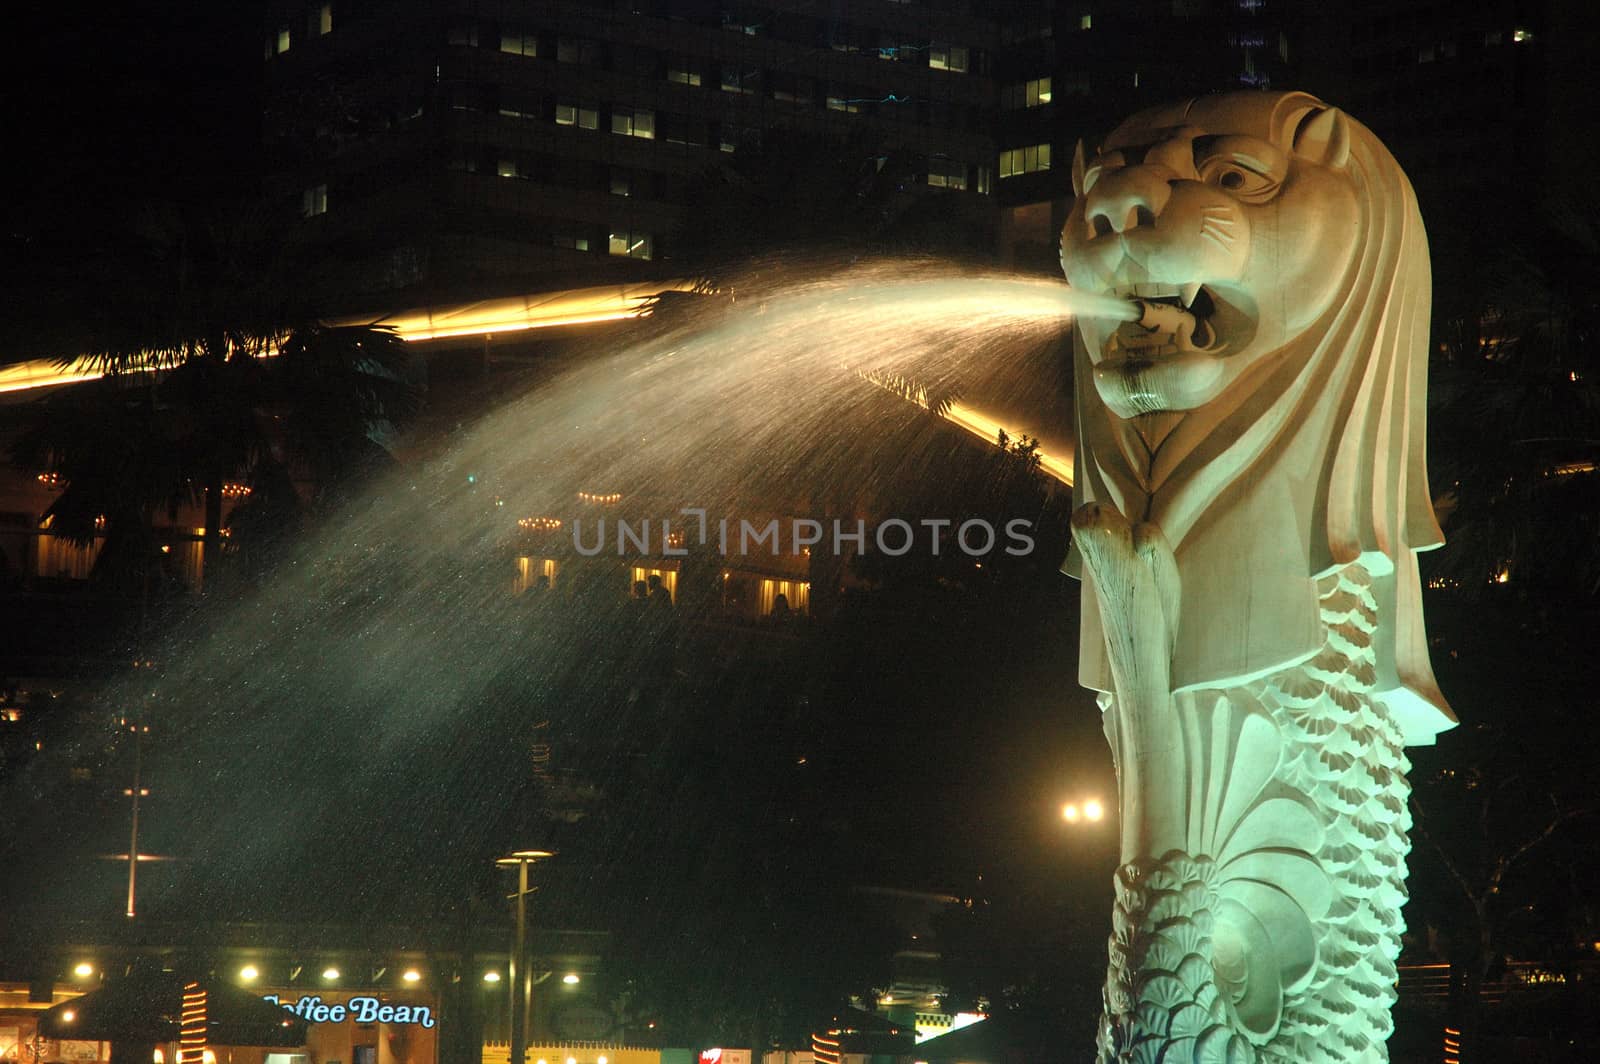 Singapore, Singapore - April 12, 2013: Merlion statue that become iconic of Singapore country.